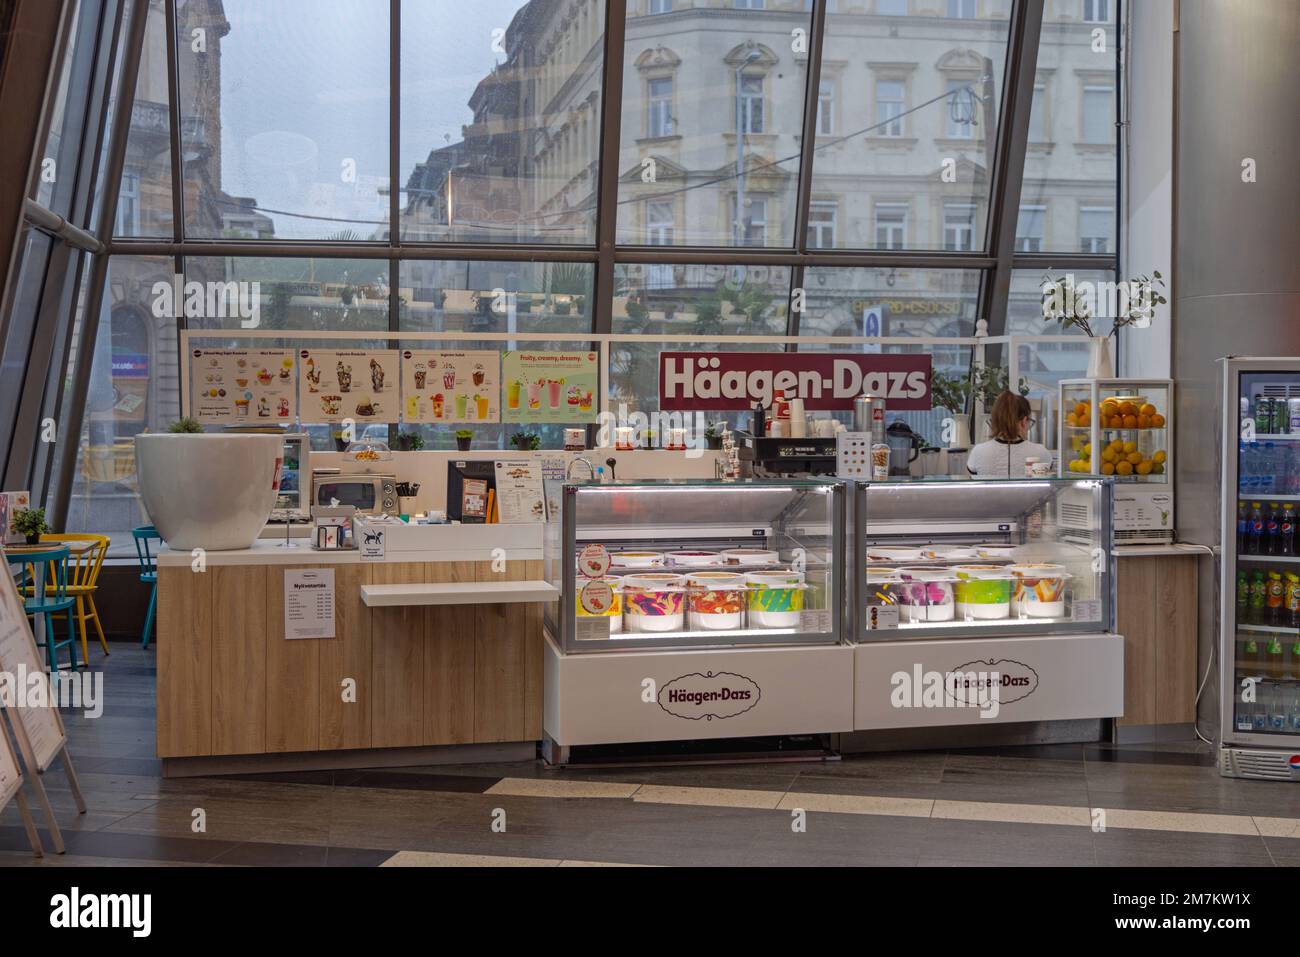 Budapest, Hungary - July 31, 2022: Ice Cream Stand Haagen Dazs at Entrance to Westend Shopping Mall. Stock Photo